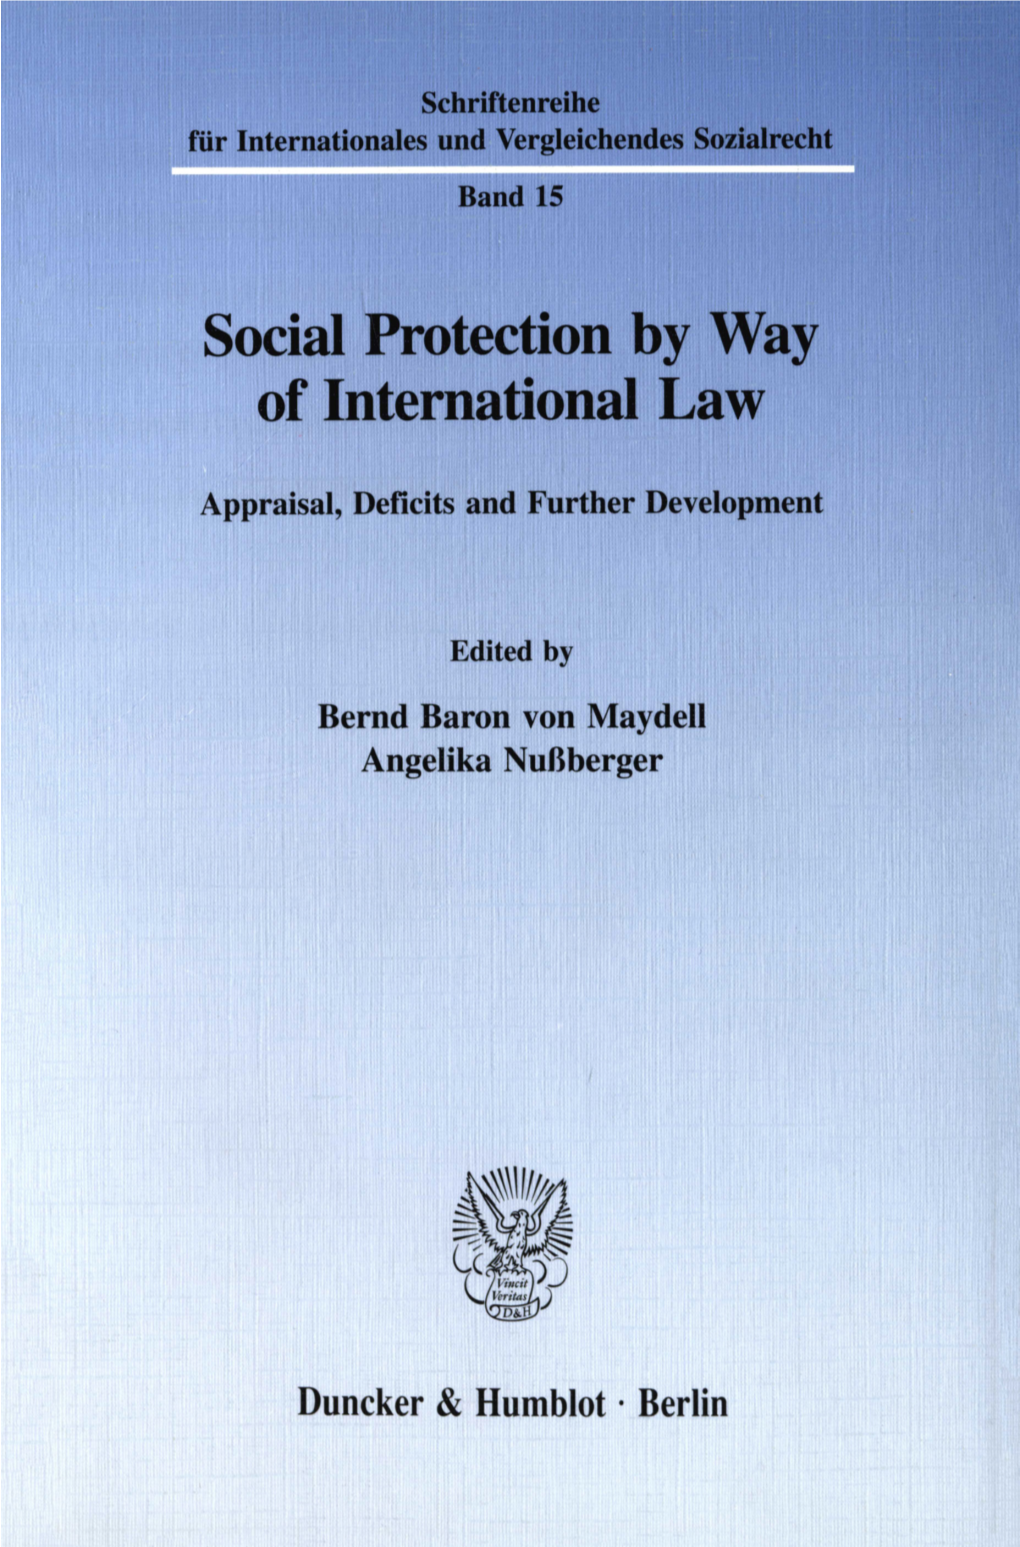 Social Protection by Way of International Law. Appraisal